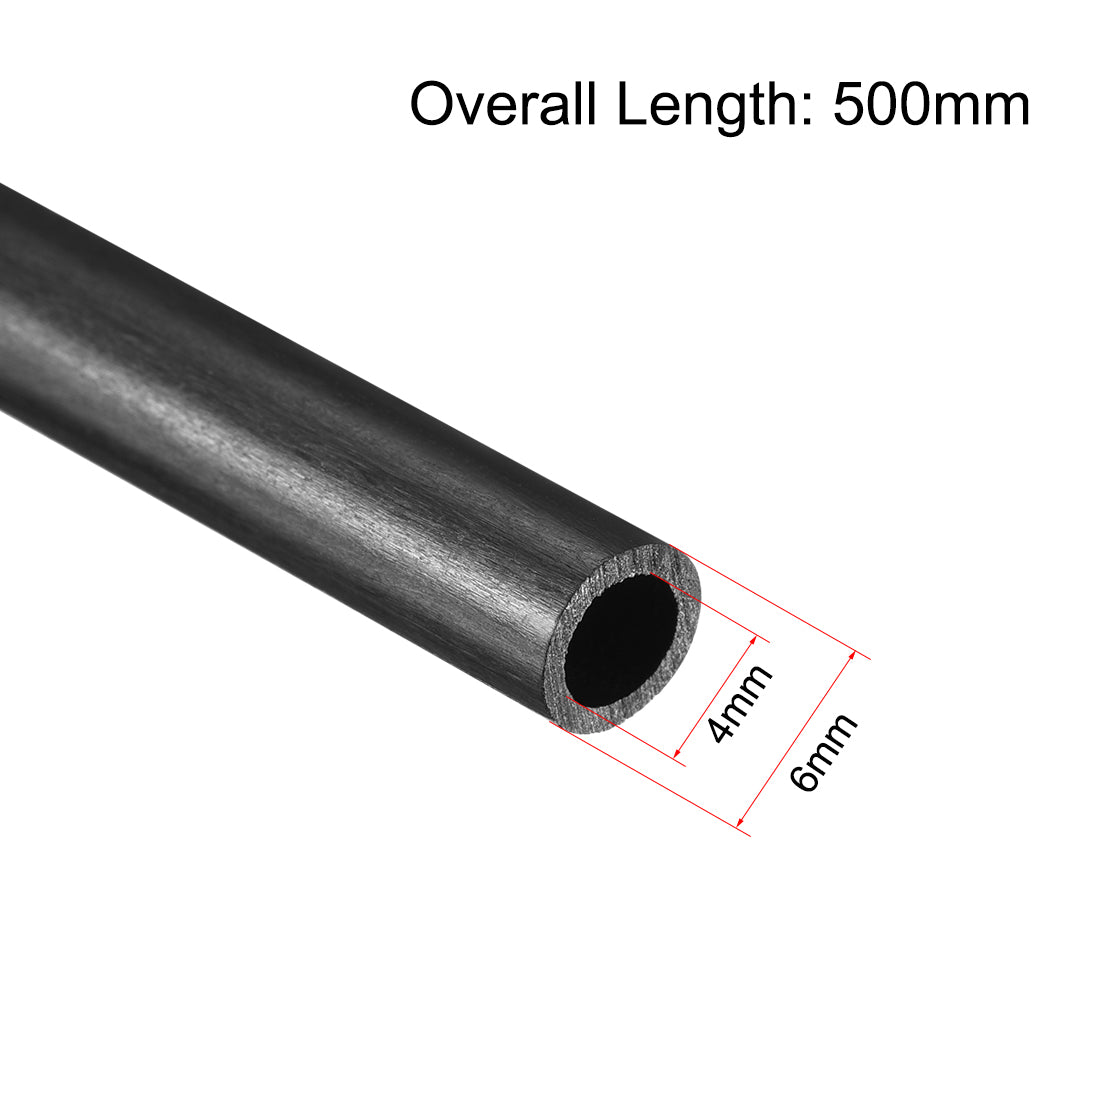 uxcell Uxcell Carbon Fiber Round Tube 6mm x 4mm x 500mm Carbon Fiber Wing Pultrusion Tubing for RC Airplane Quadcopter